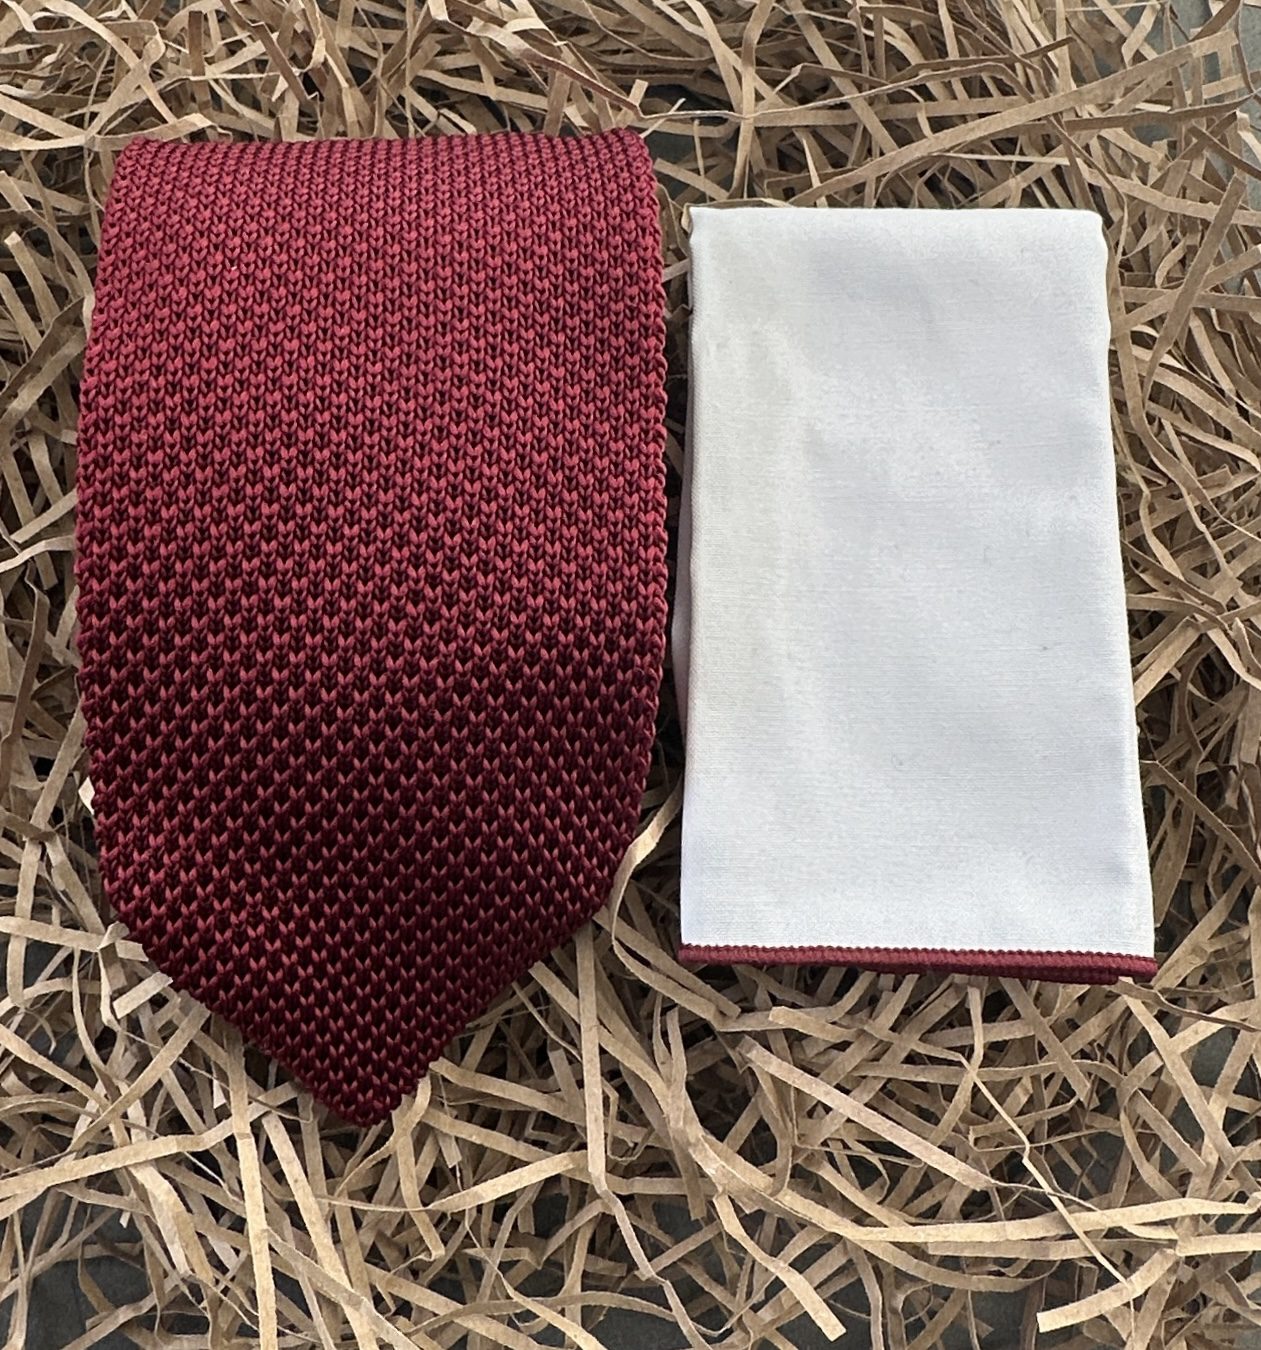 A red knitted mens tie and white pocket handkerchief gift set or wedding attire